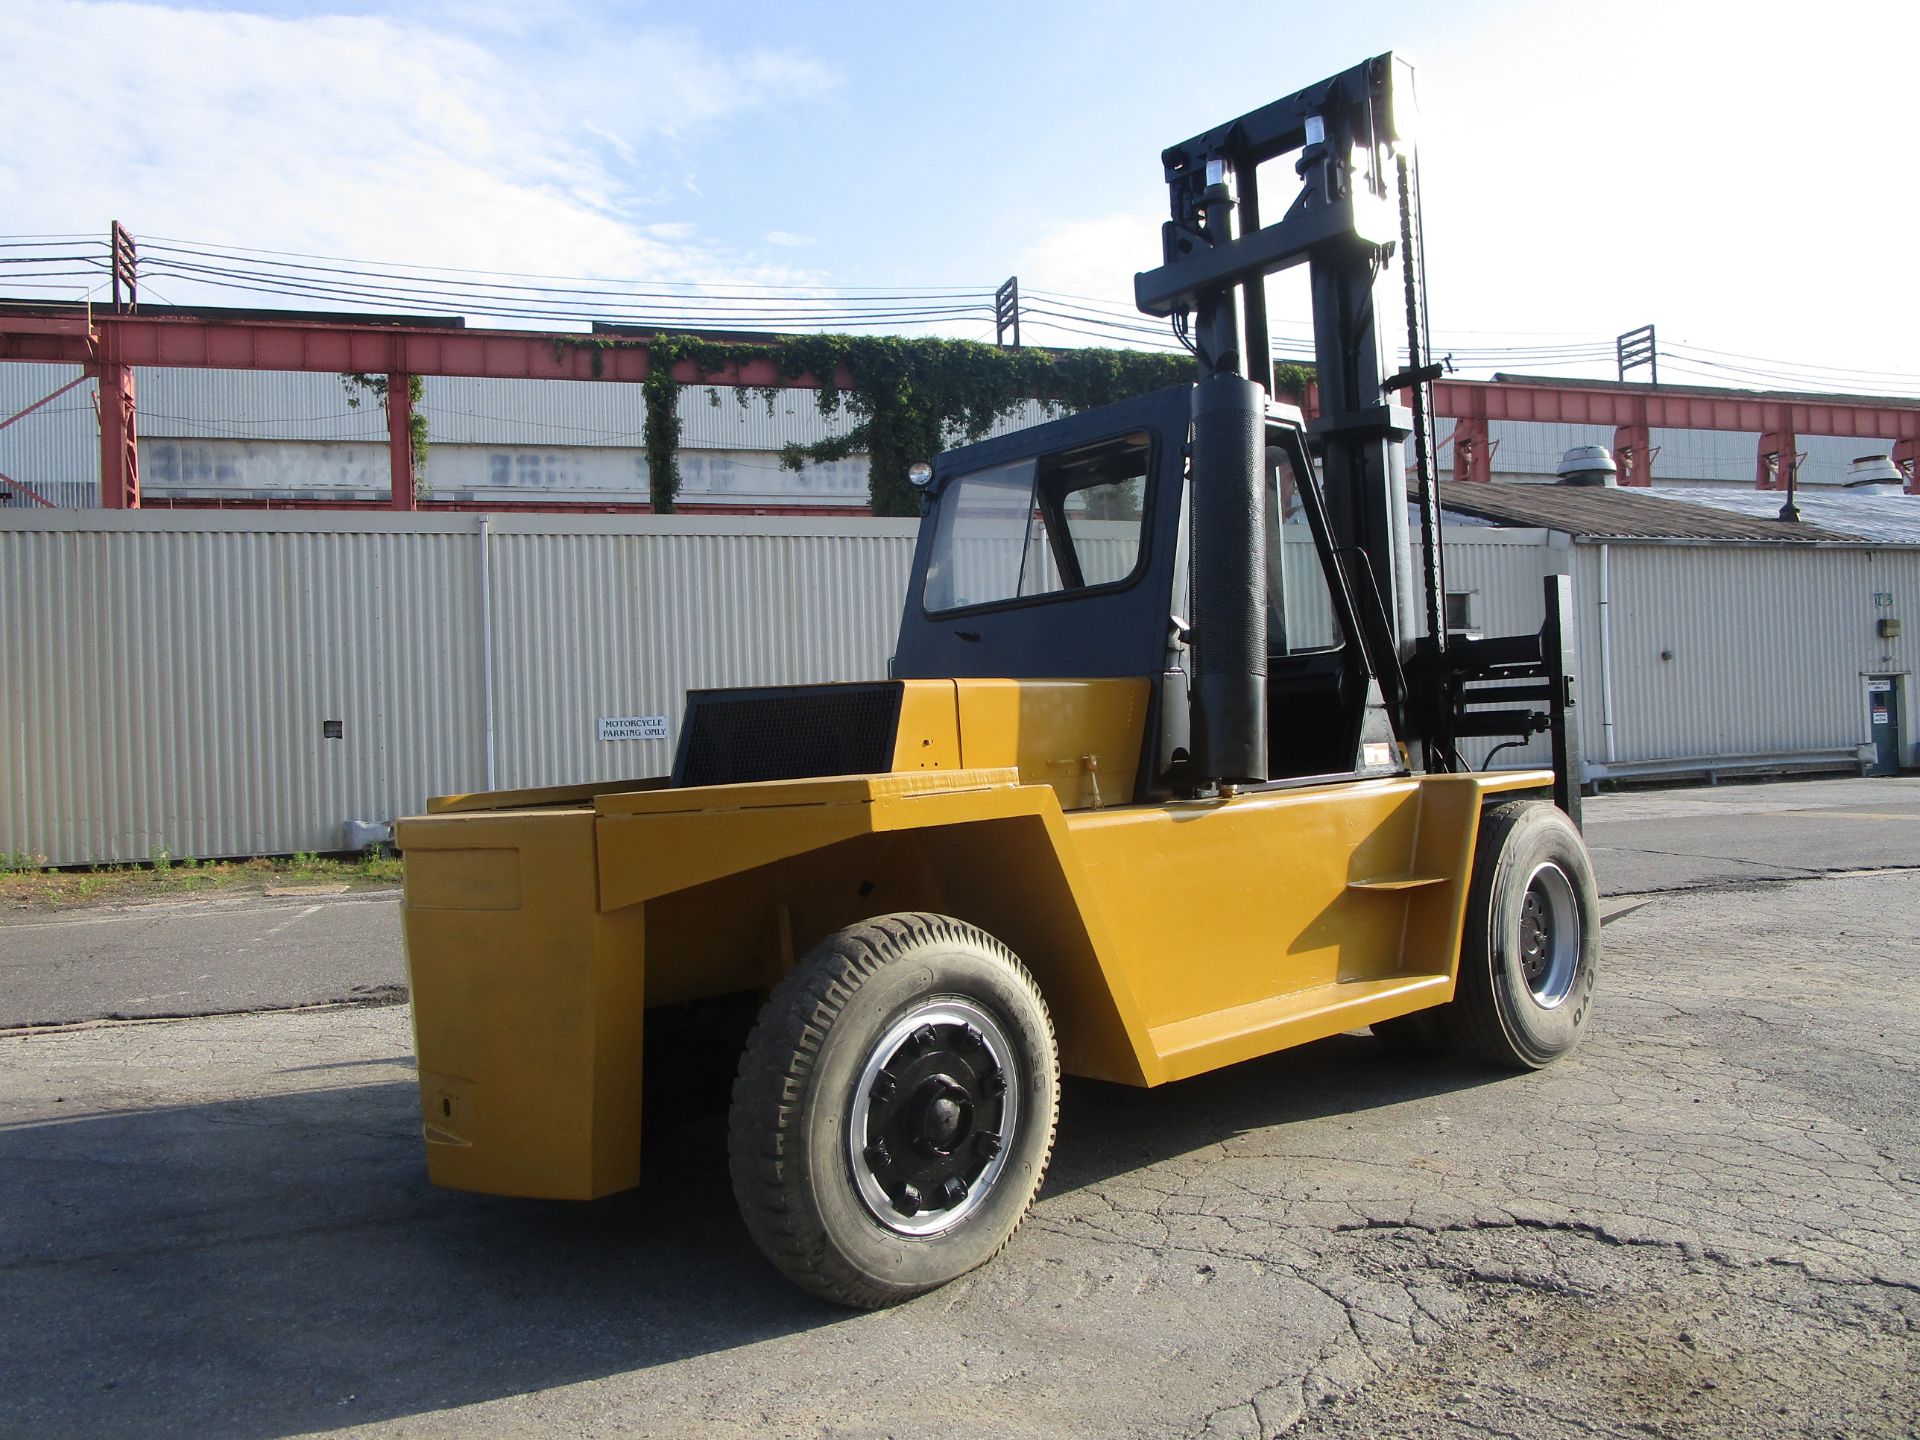 Caterpillar V250 25,000lb Forklift - Located in Lester, PA - Image 3 of 9